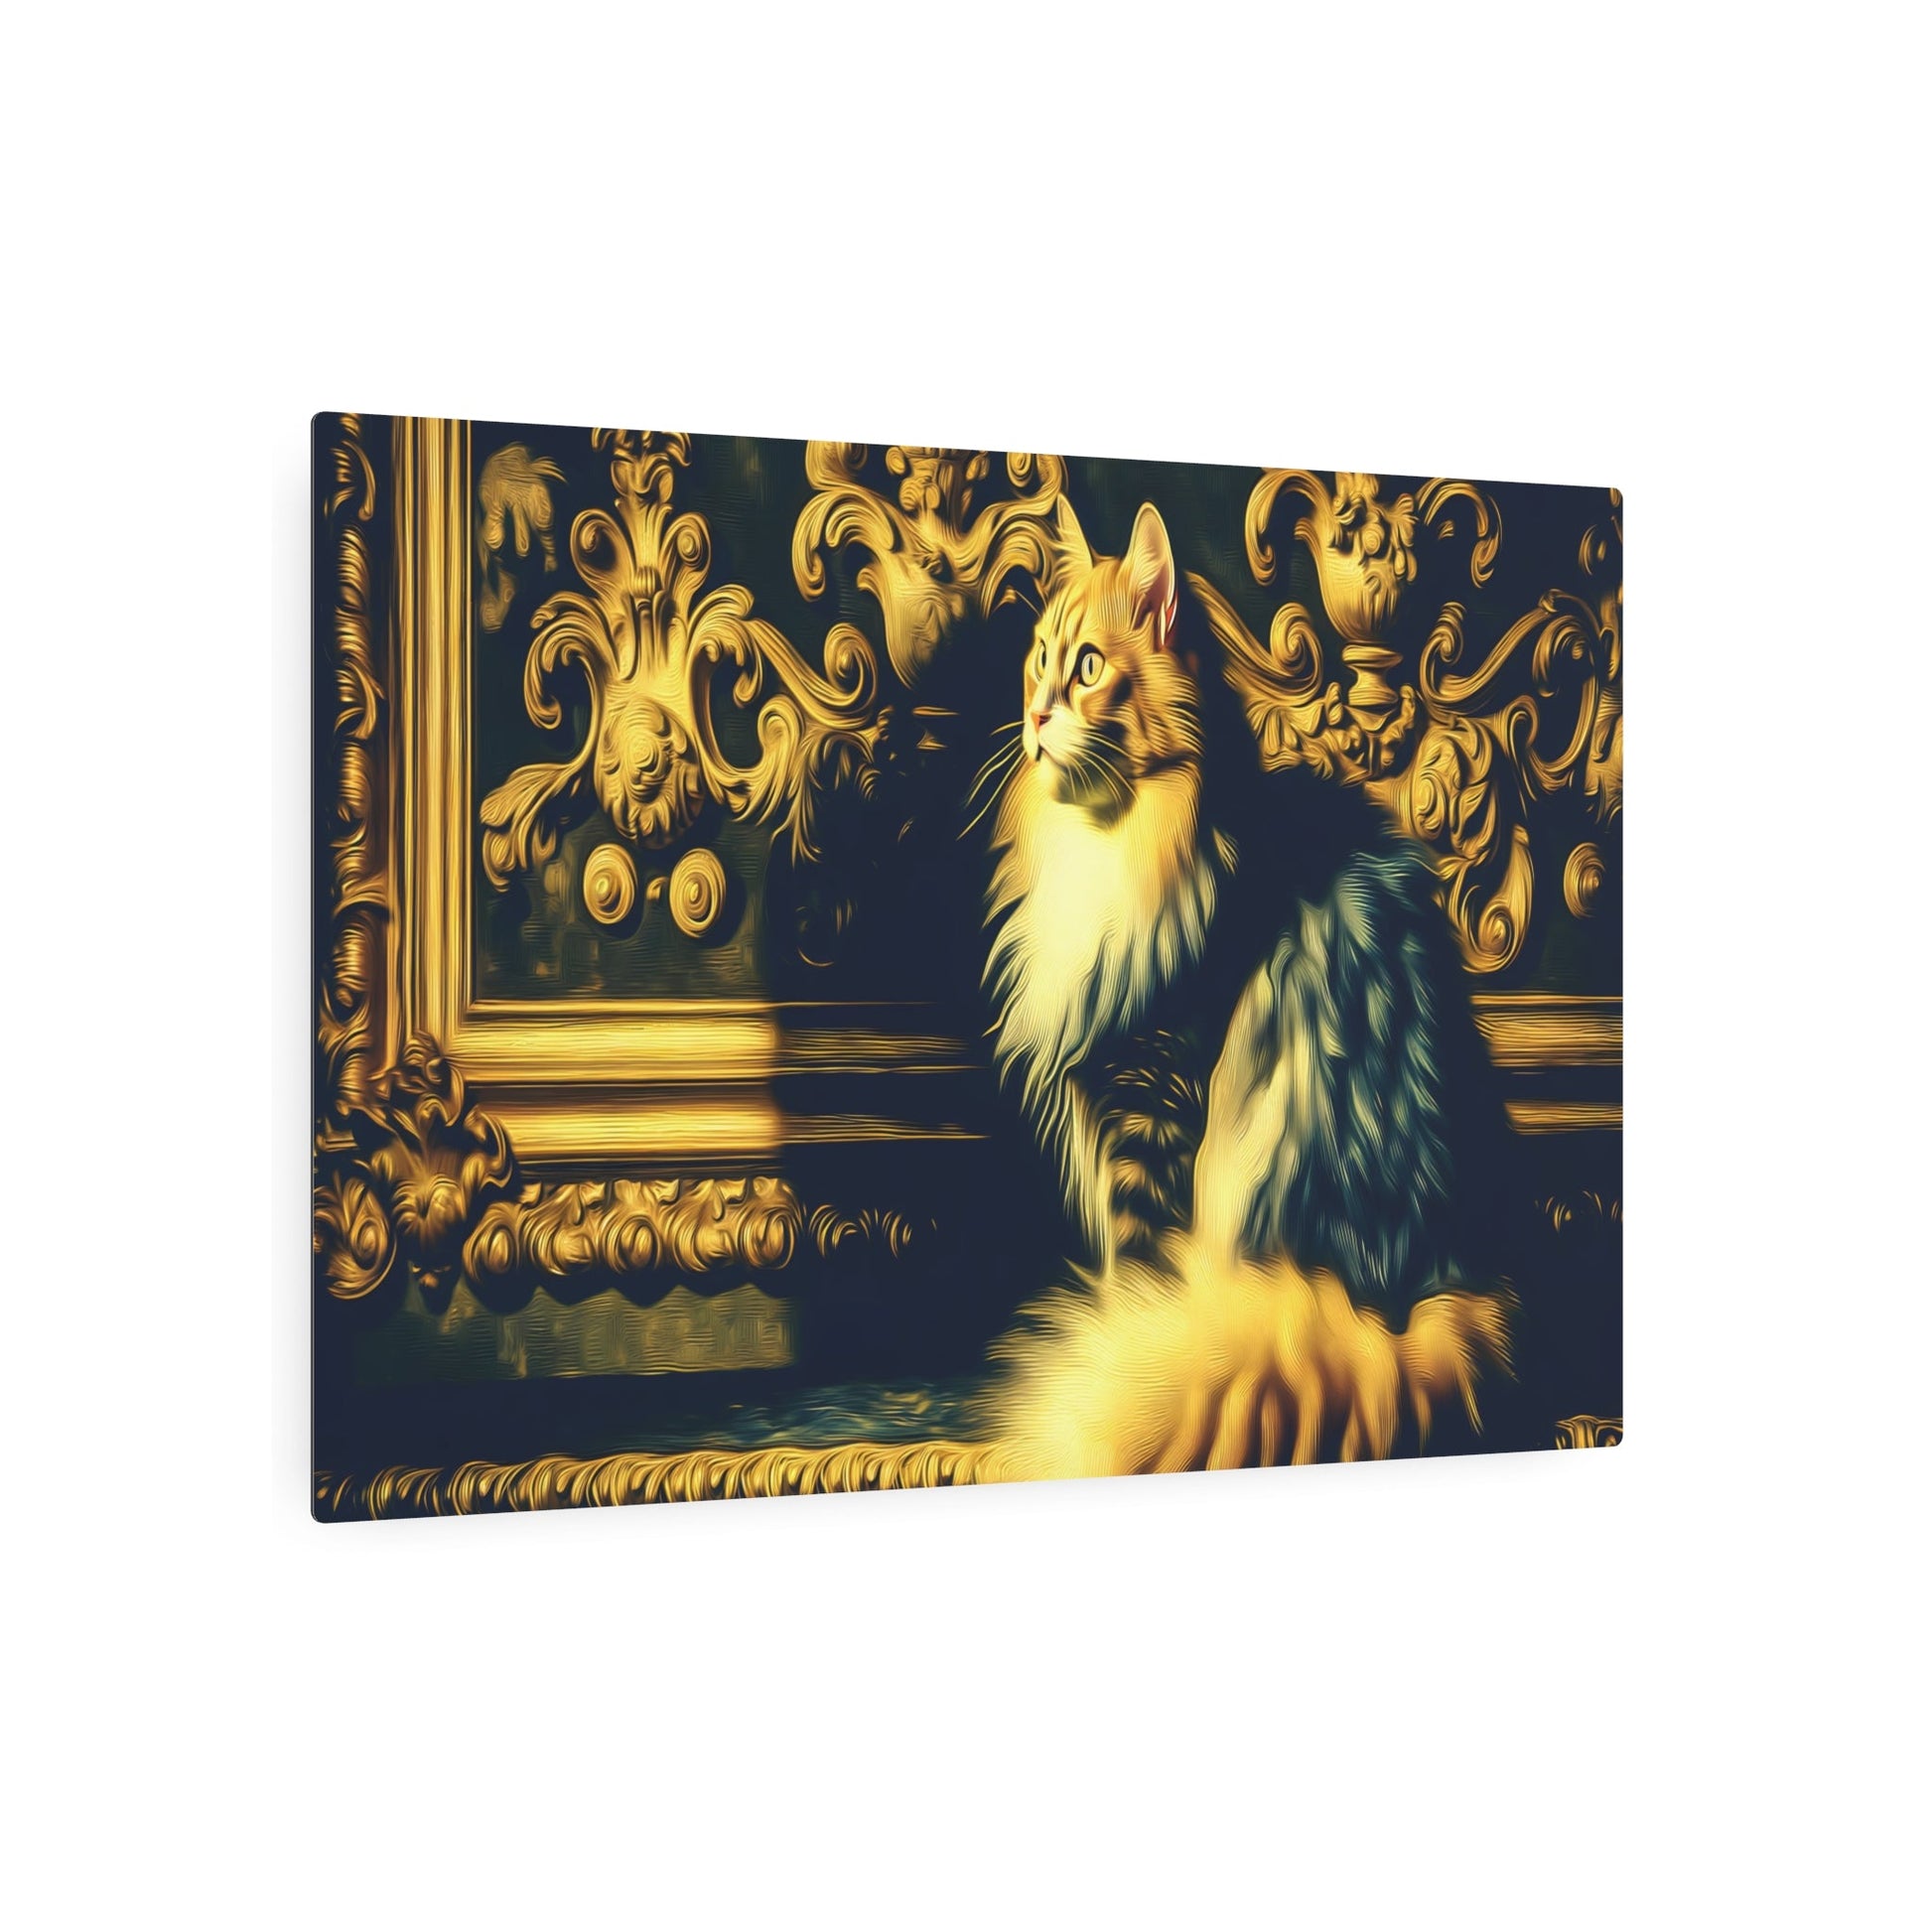 Metal Poster Art | "Baroque Art Inspired Royal Cat Image - Western Styles with Dramatic Lighting and Opulent Decoration" - Metal Poster Art 36″ x 24″ (Horizontal) 0.12''